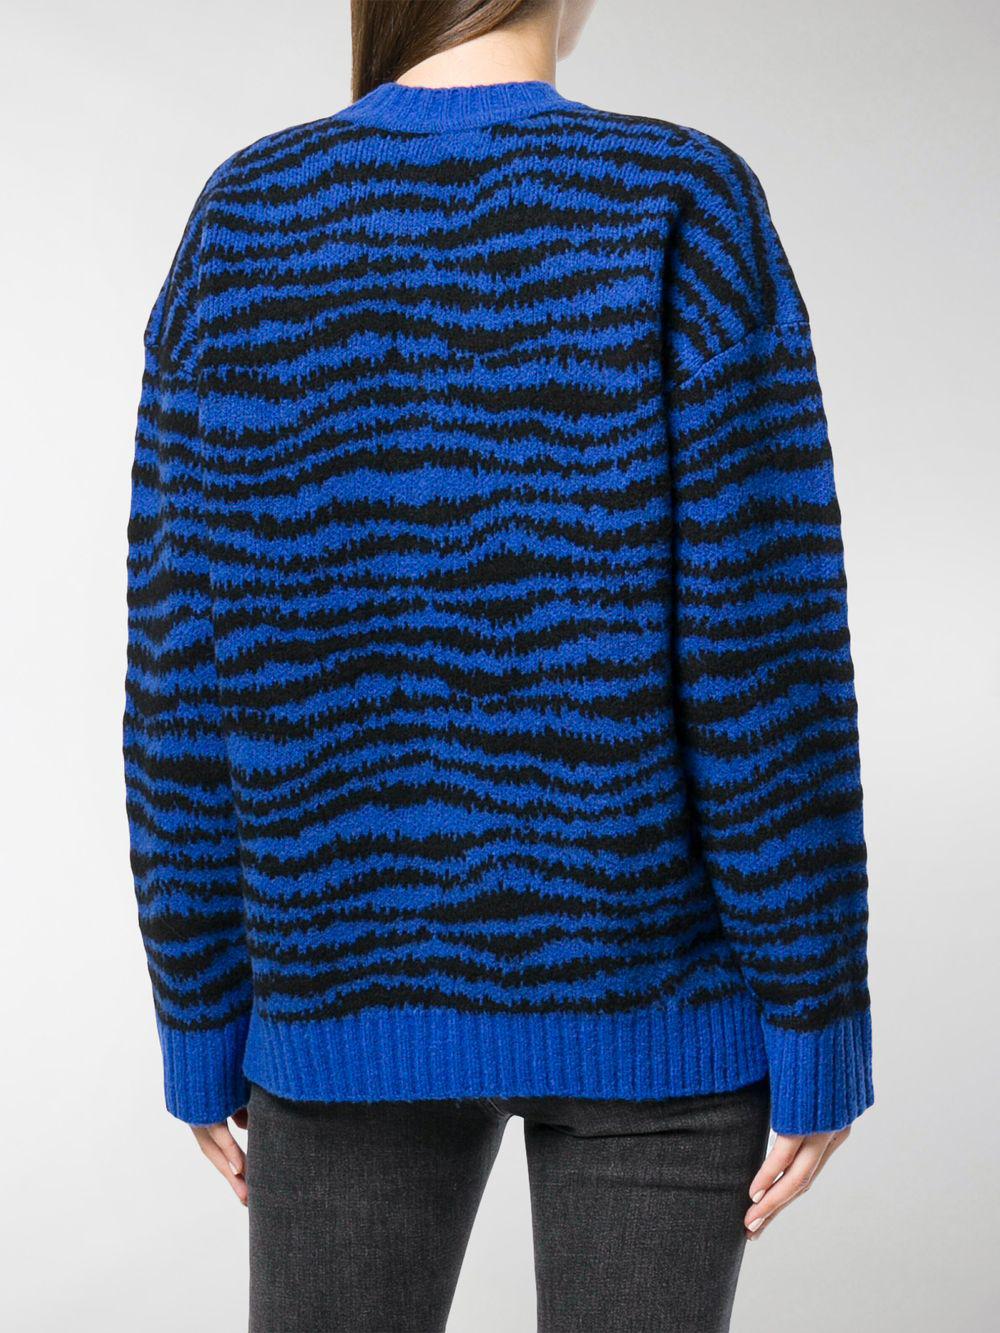 Marc Jacobs Wool Zebra Print Knitted Sweater in Blue - Lyst